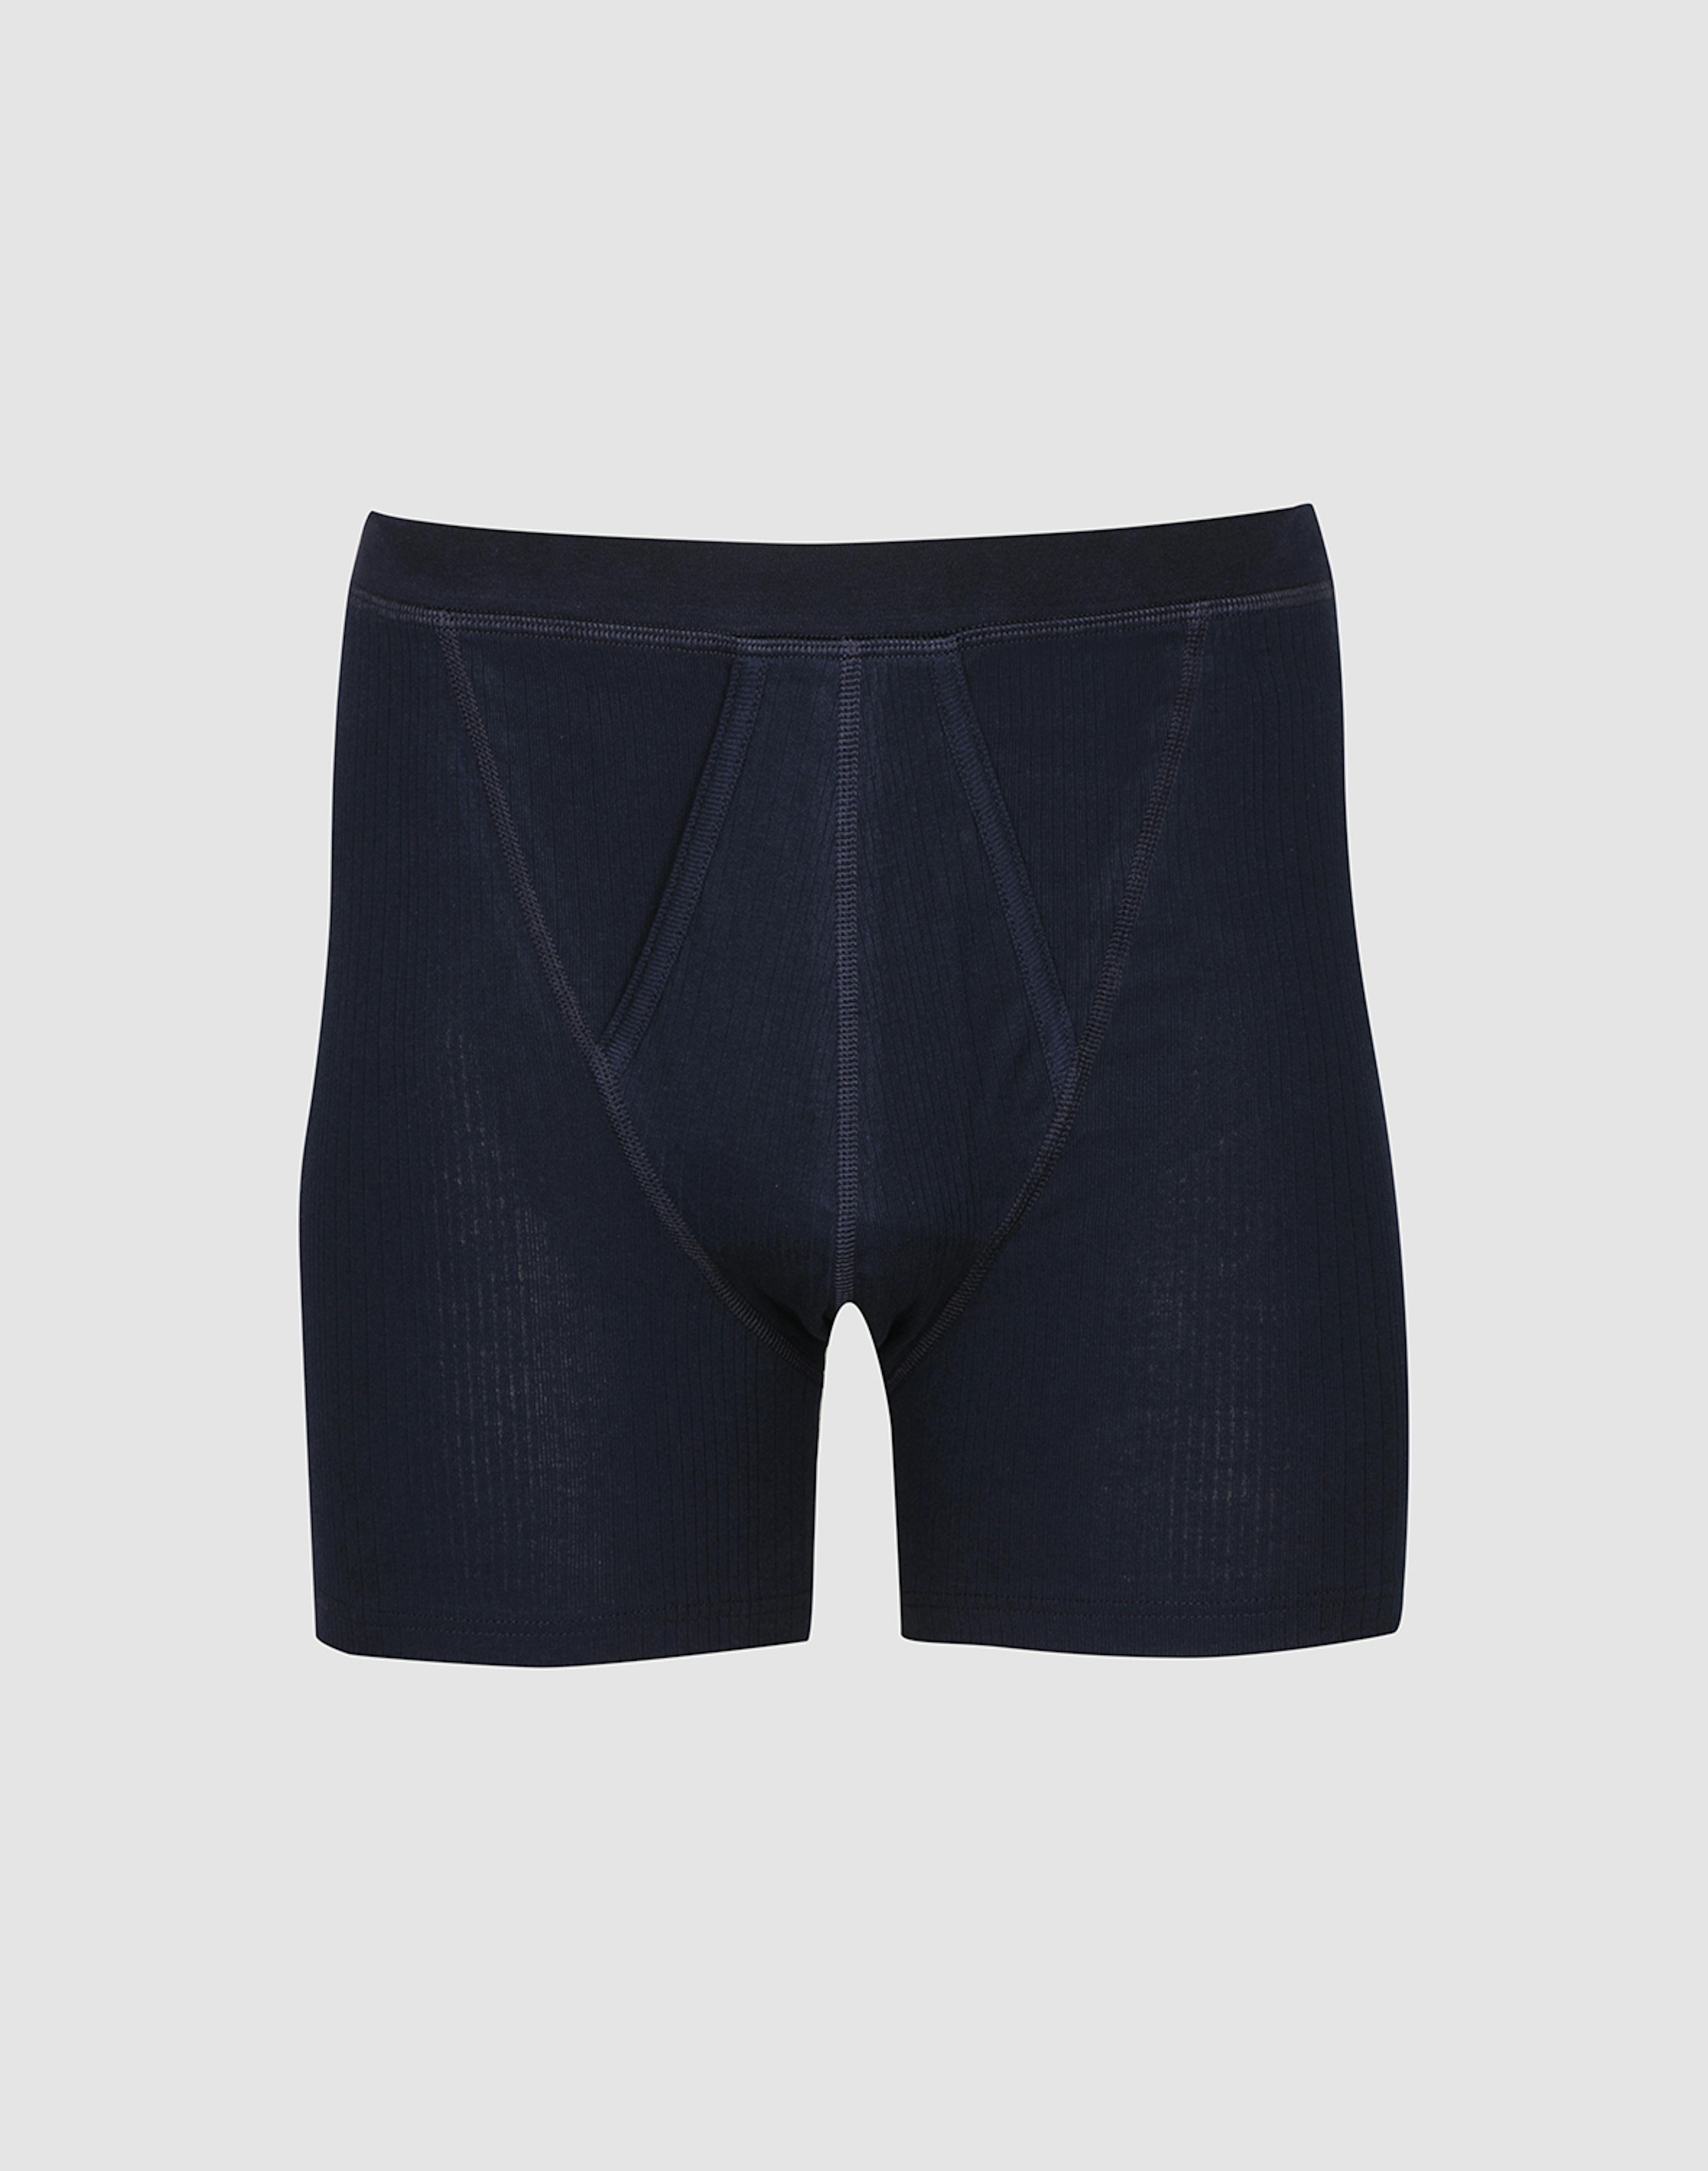 Men's cotton rib boxer shorts with fly - Navy - Dilling